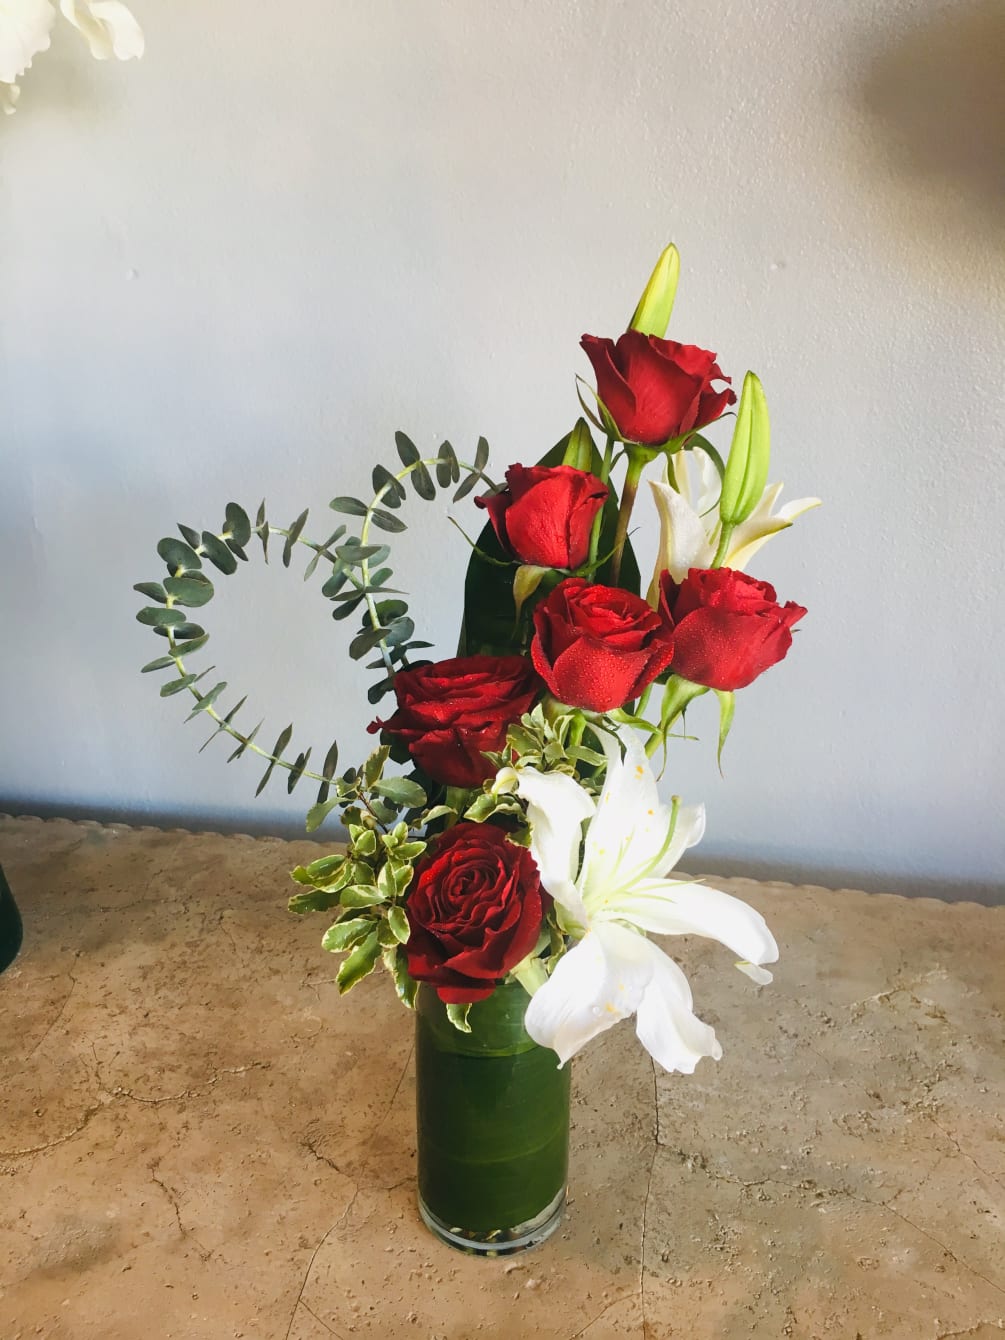 A beautiful romantic gift of red roses, white lilies accented with eucalyptus